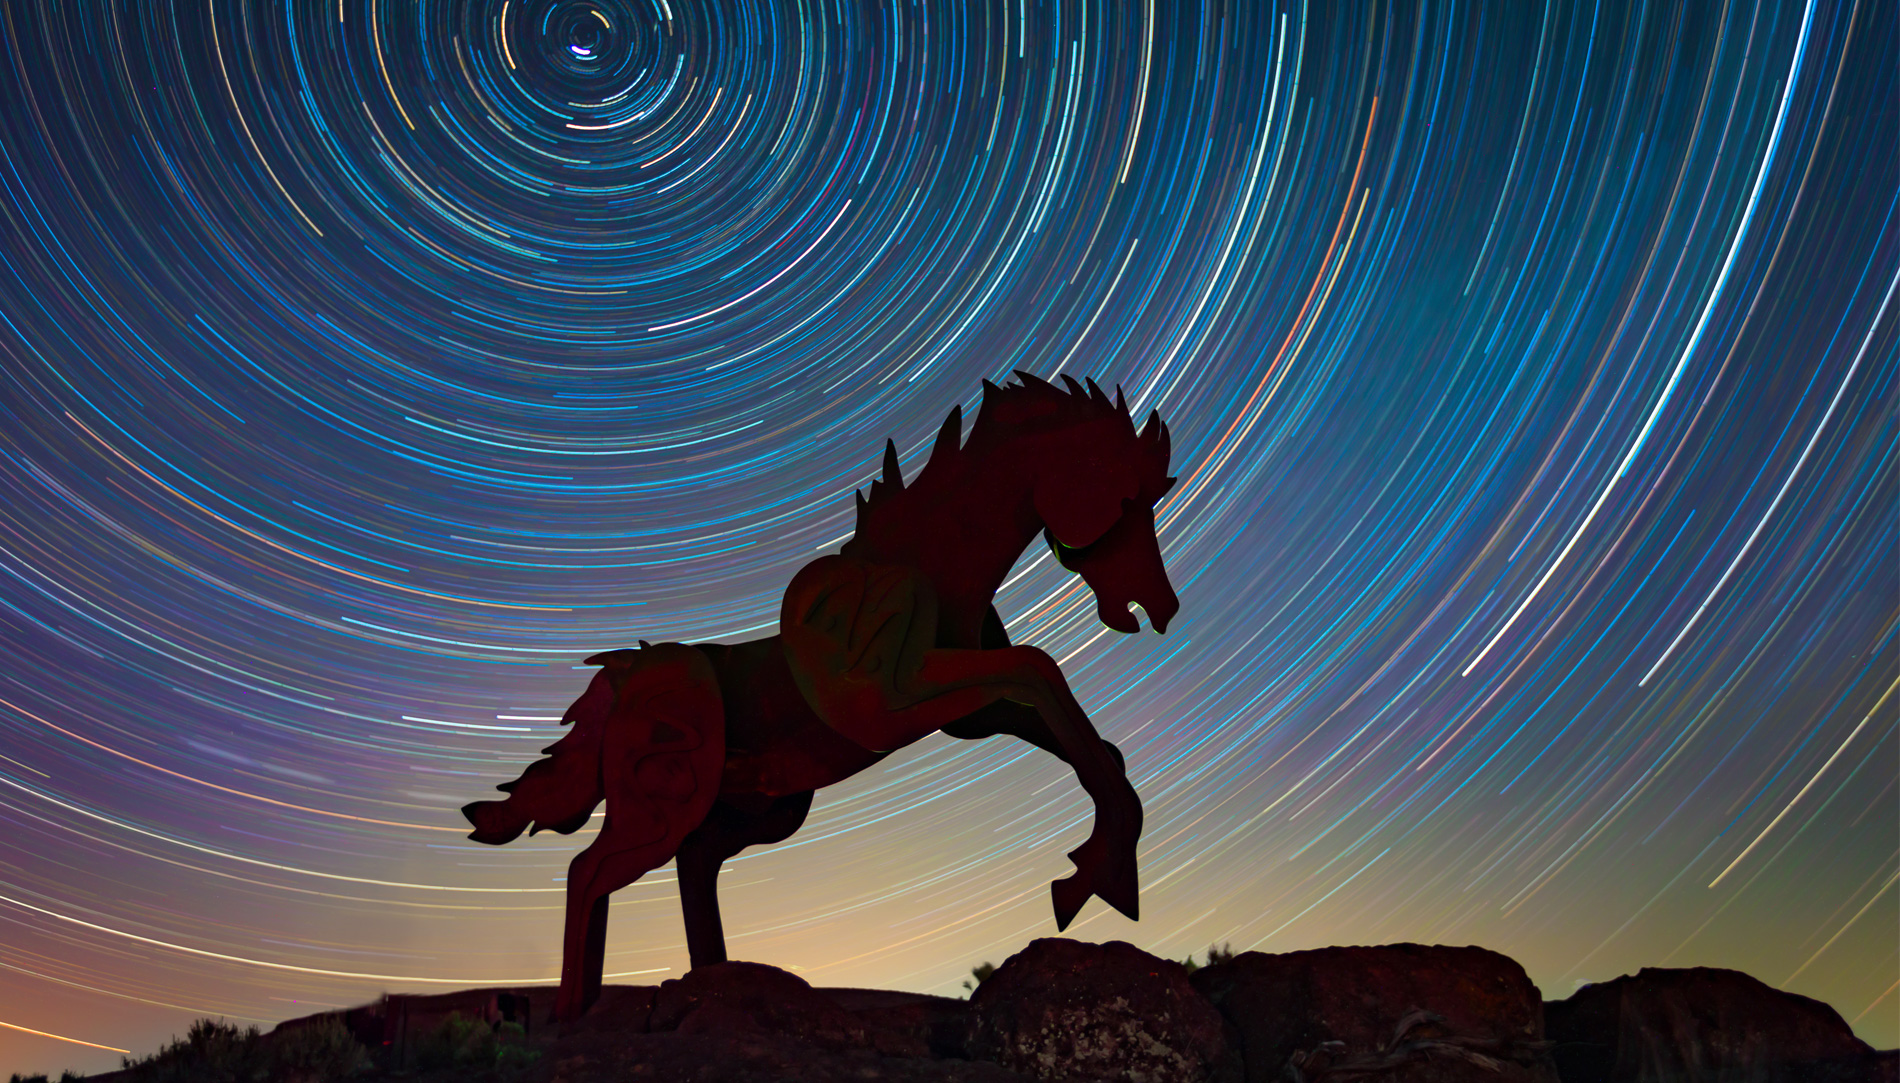 A long-exposure photo captures star trails — the apparent motion of stars as the Earth rotates — over David Govedare’s “Grandfather Cuts Loose the Ponies” sculpture near Vantage, Washington.